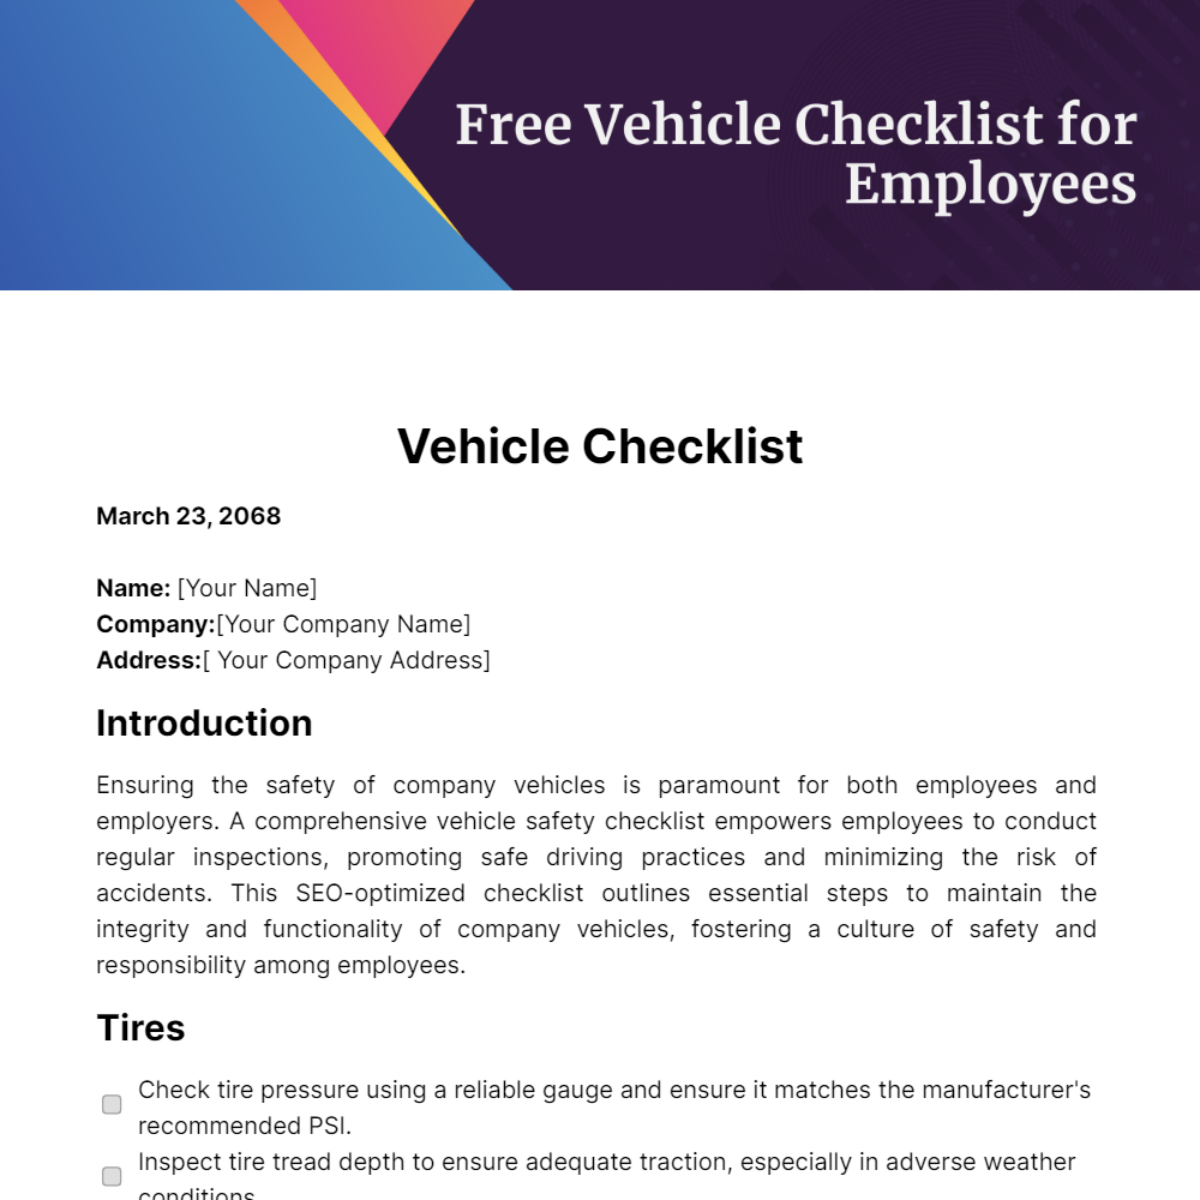 Free Vehicle Checklist for Employees Template